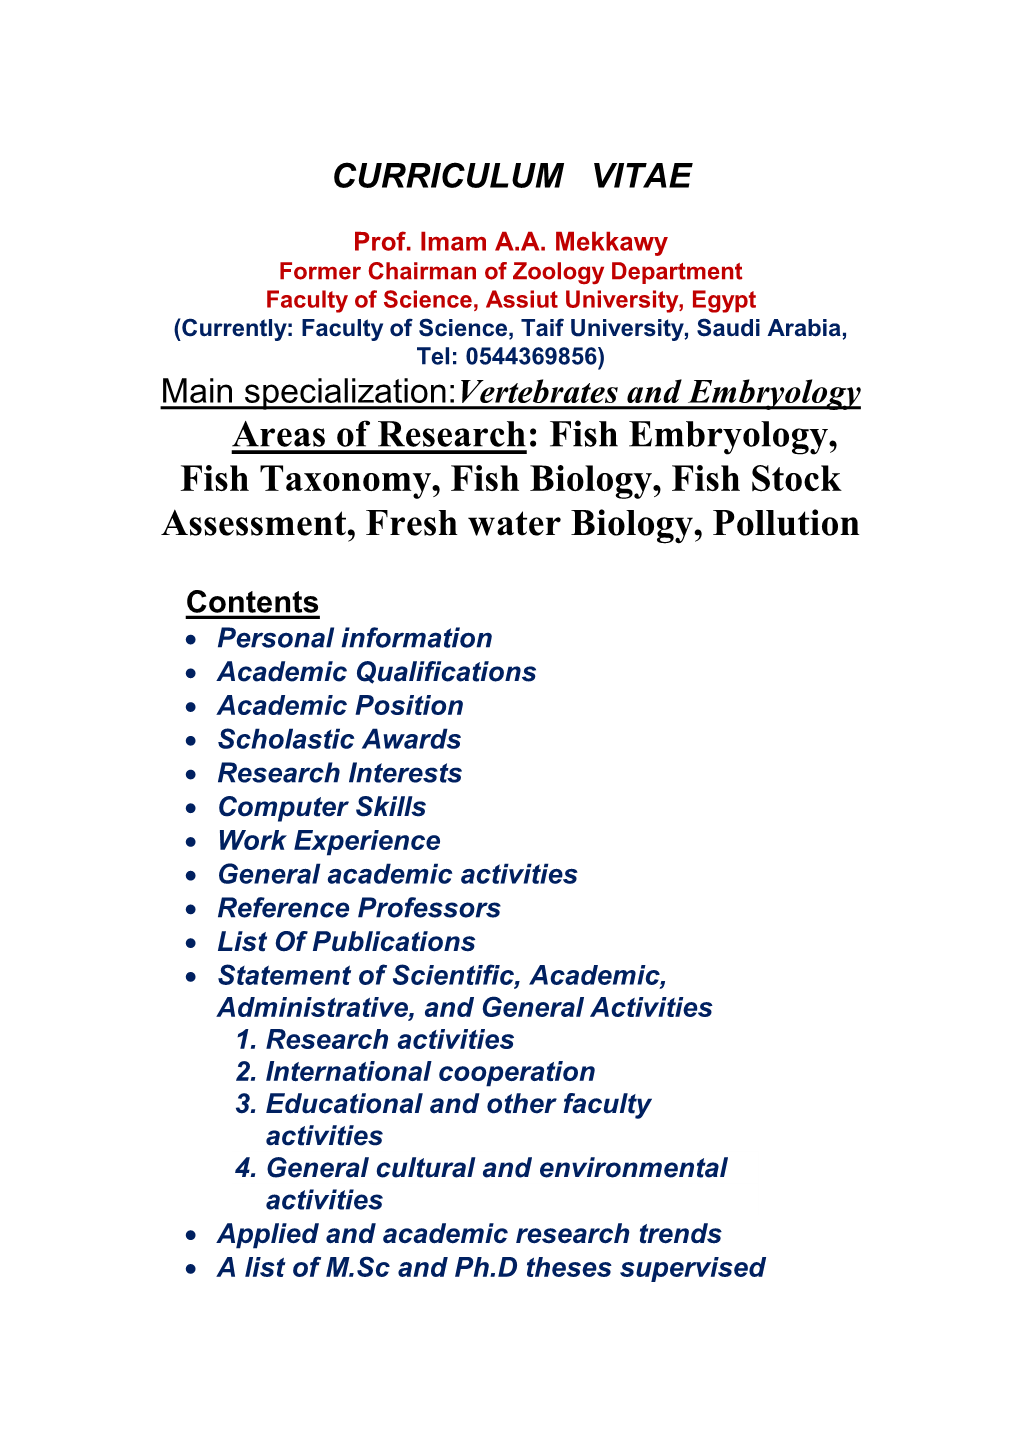 Fish Embryology, Fish Taxonomy, Fish Biology, Fish Stock Assessment, Fresh Water Biology, Pollution